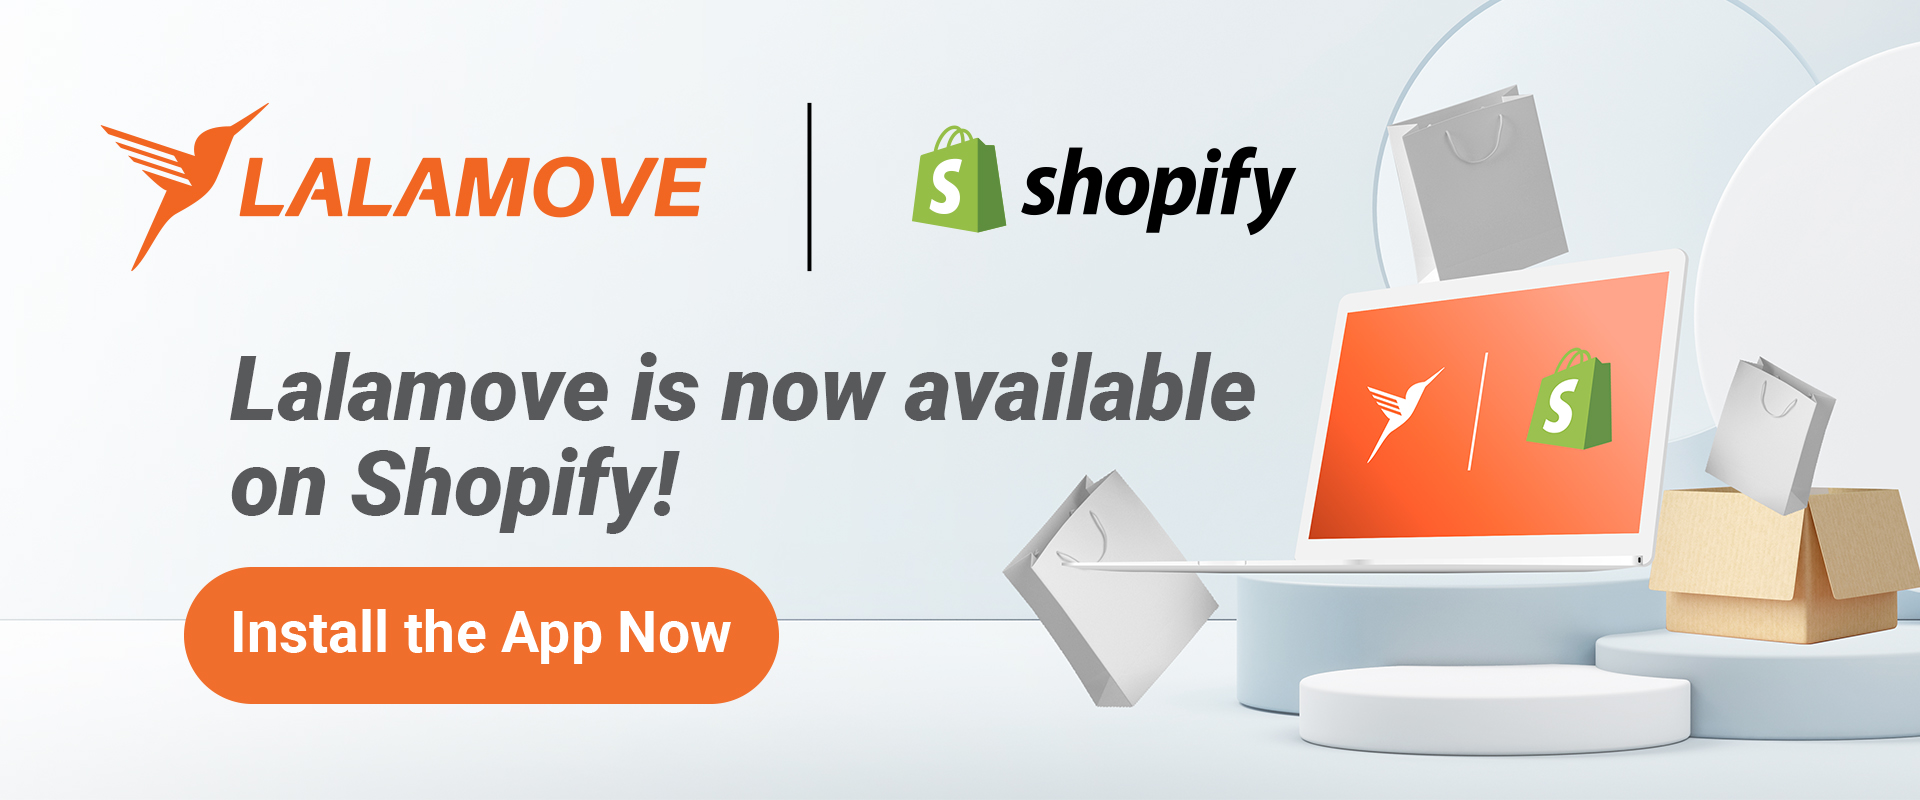 lalamove is now available on shopify